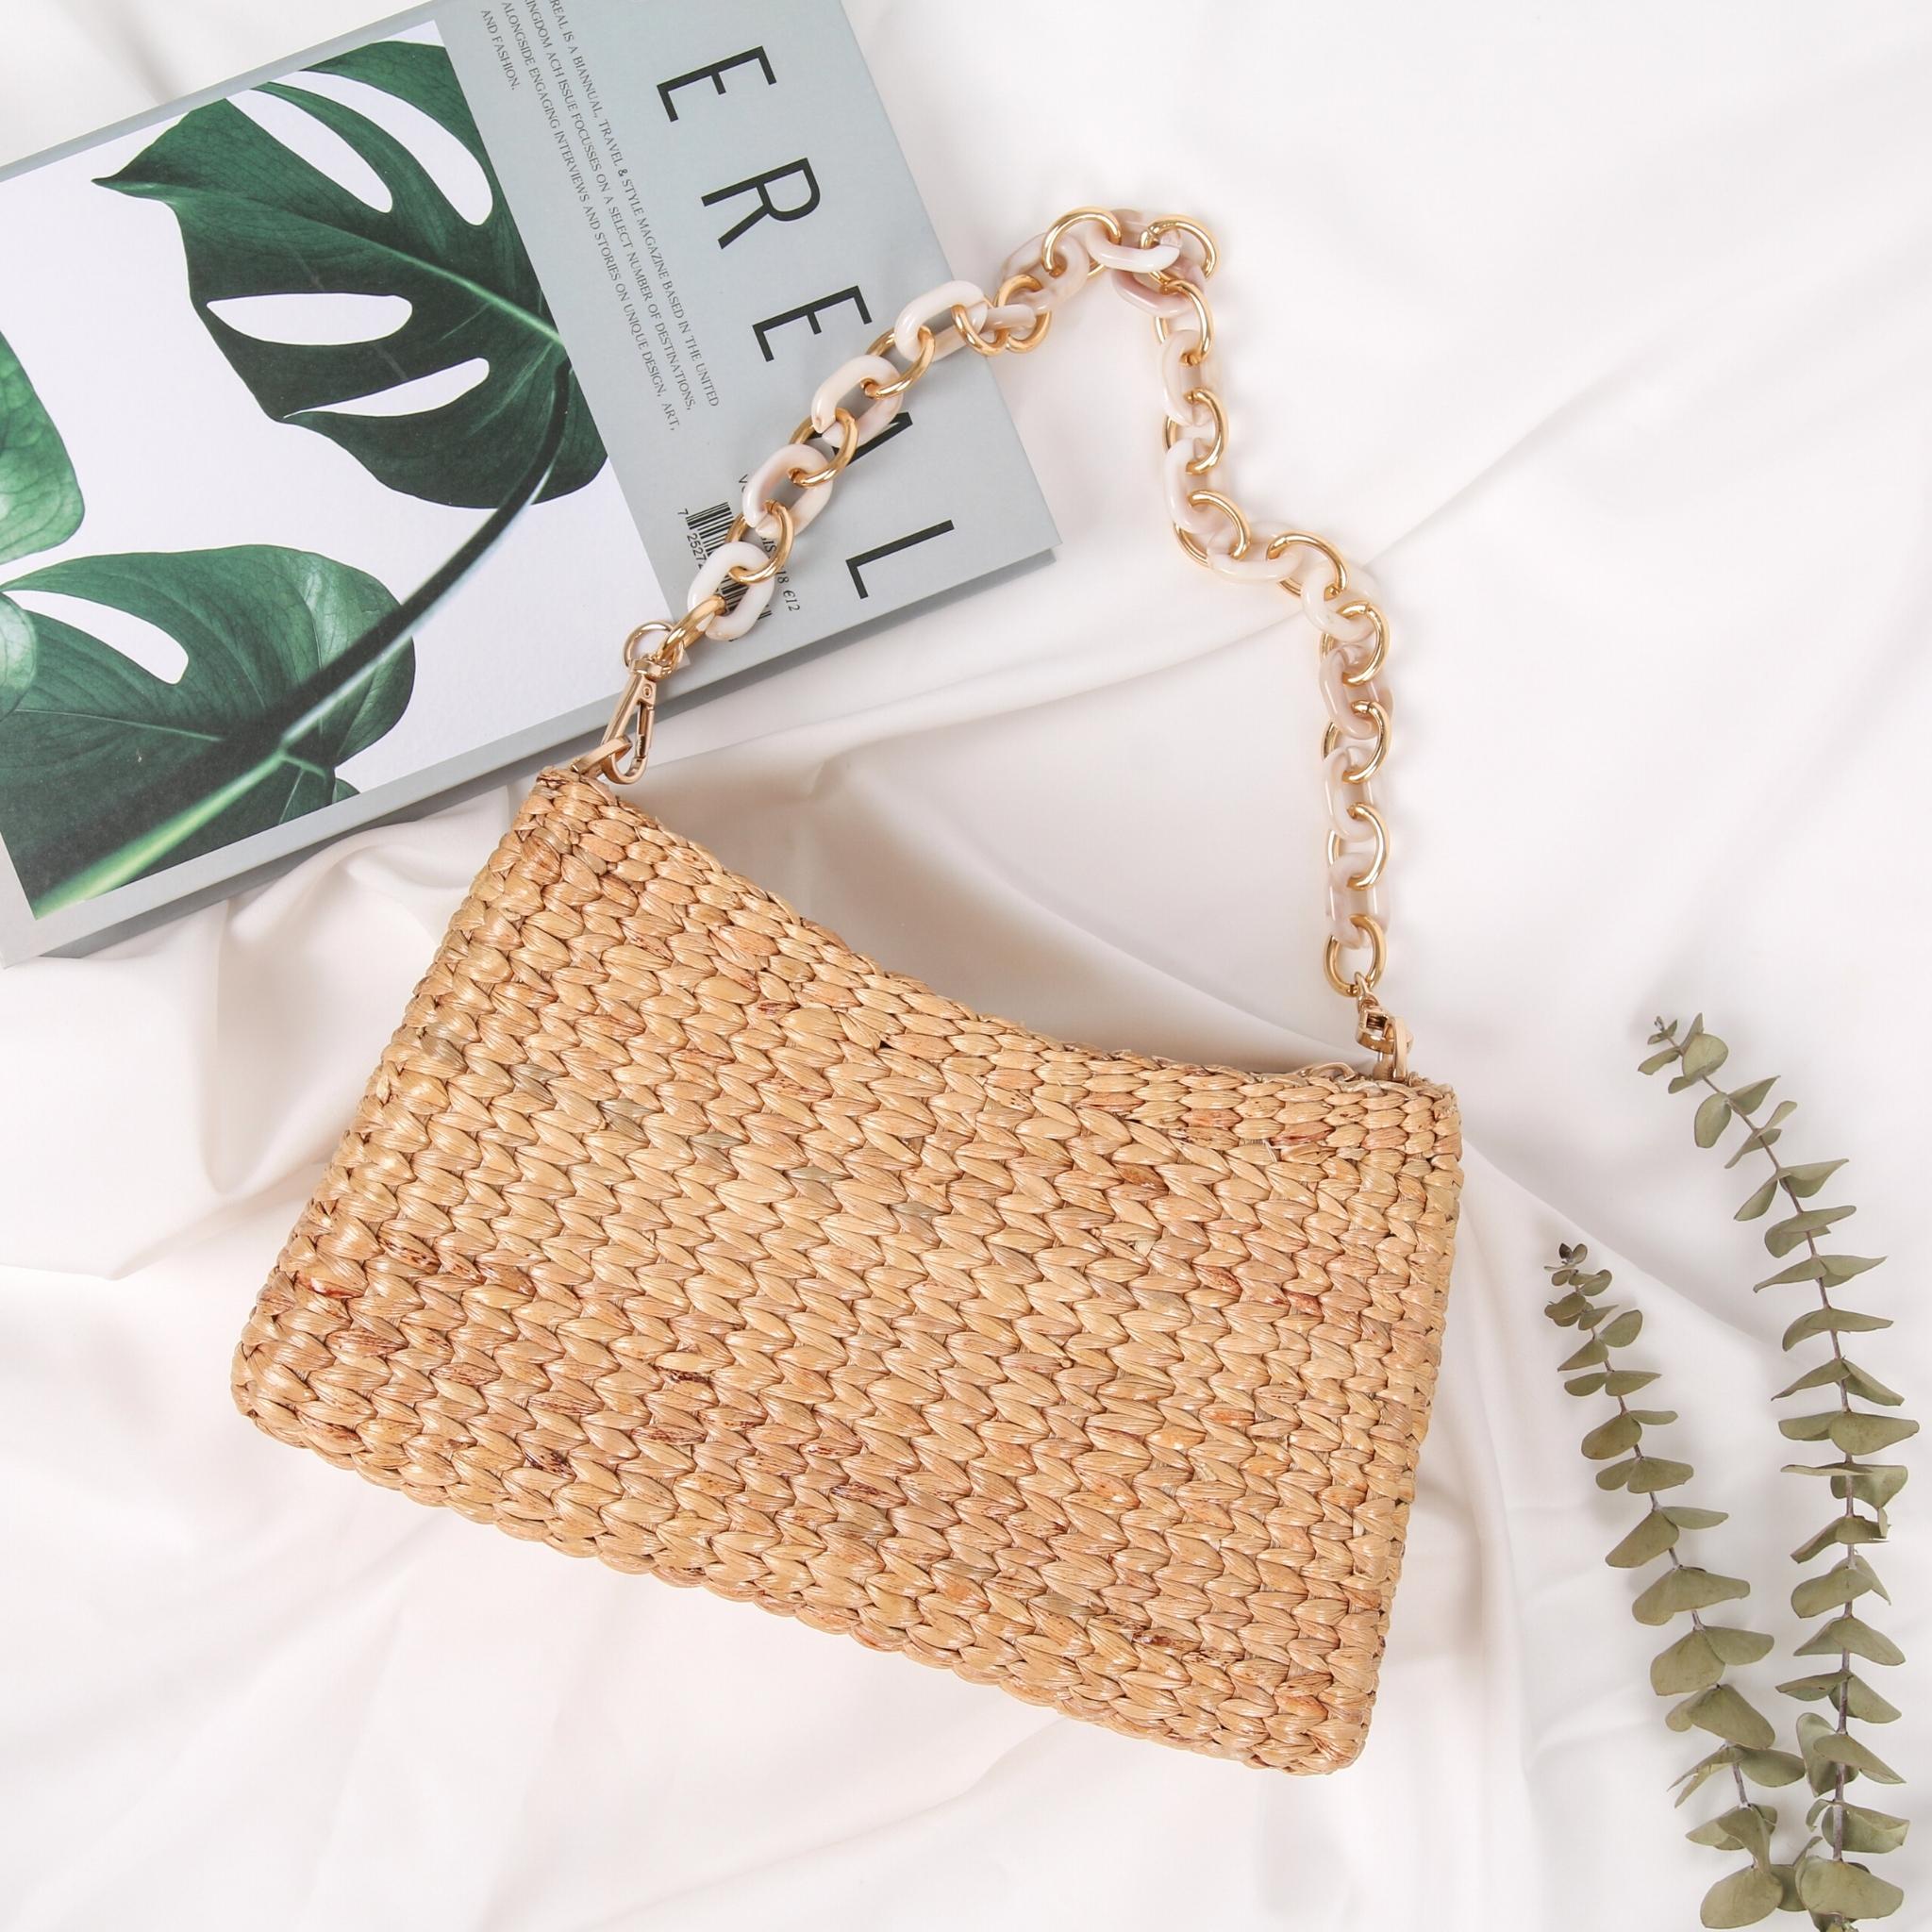 Woven Straw Bags Made in Indonesia shopping bags Hand woven from straw  fiber. Hand weave by artisans in Indonesia | Bags, Rattan handbags, Straw  bags